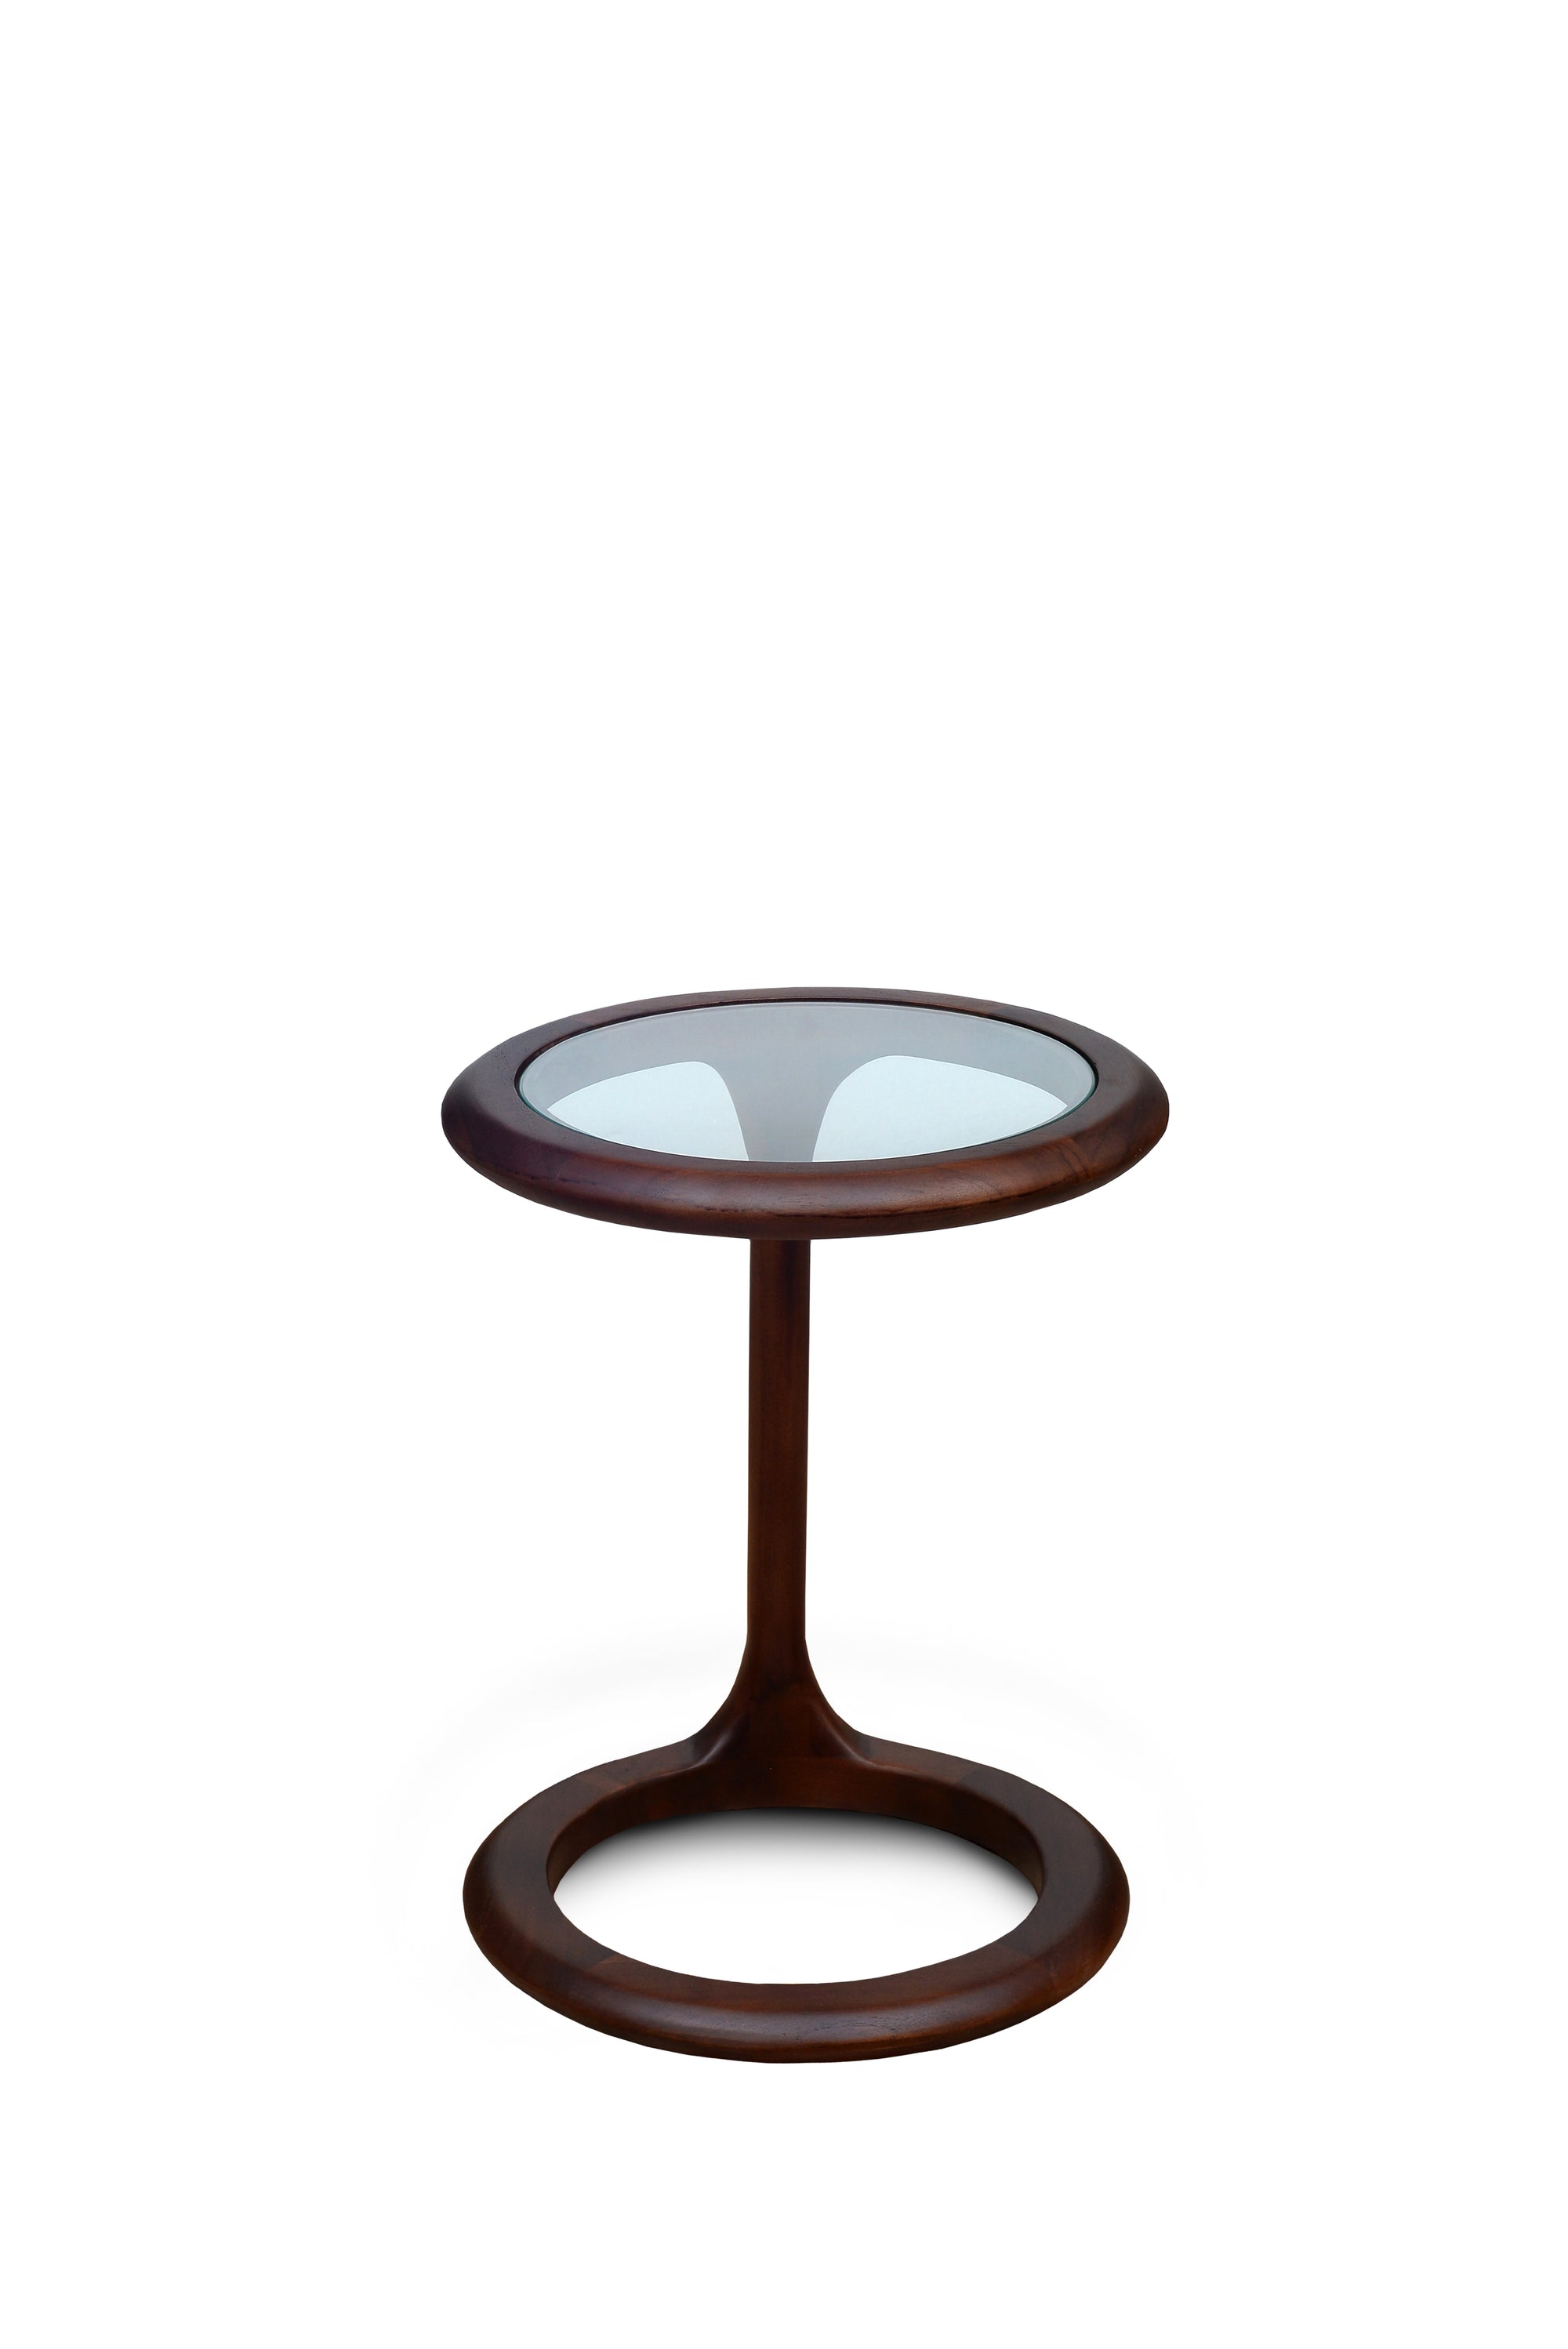 Nido Low Table Teak with Glass Top in Walnut Finish